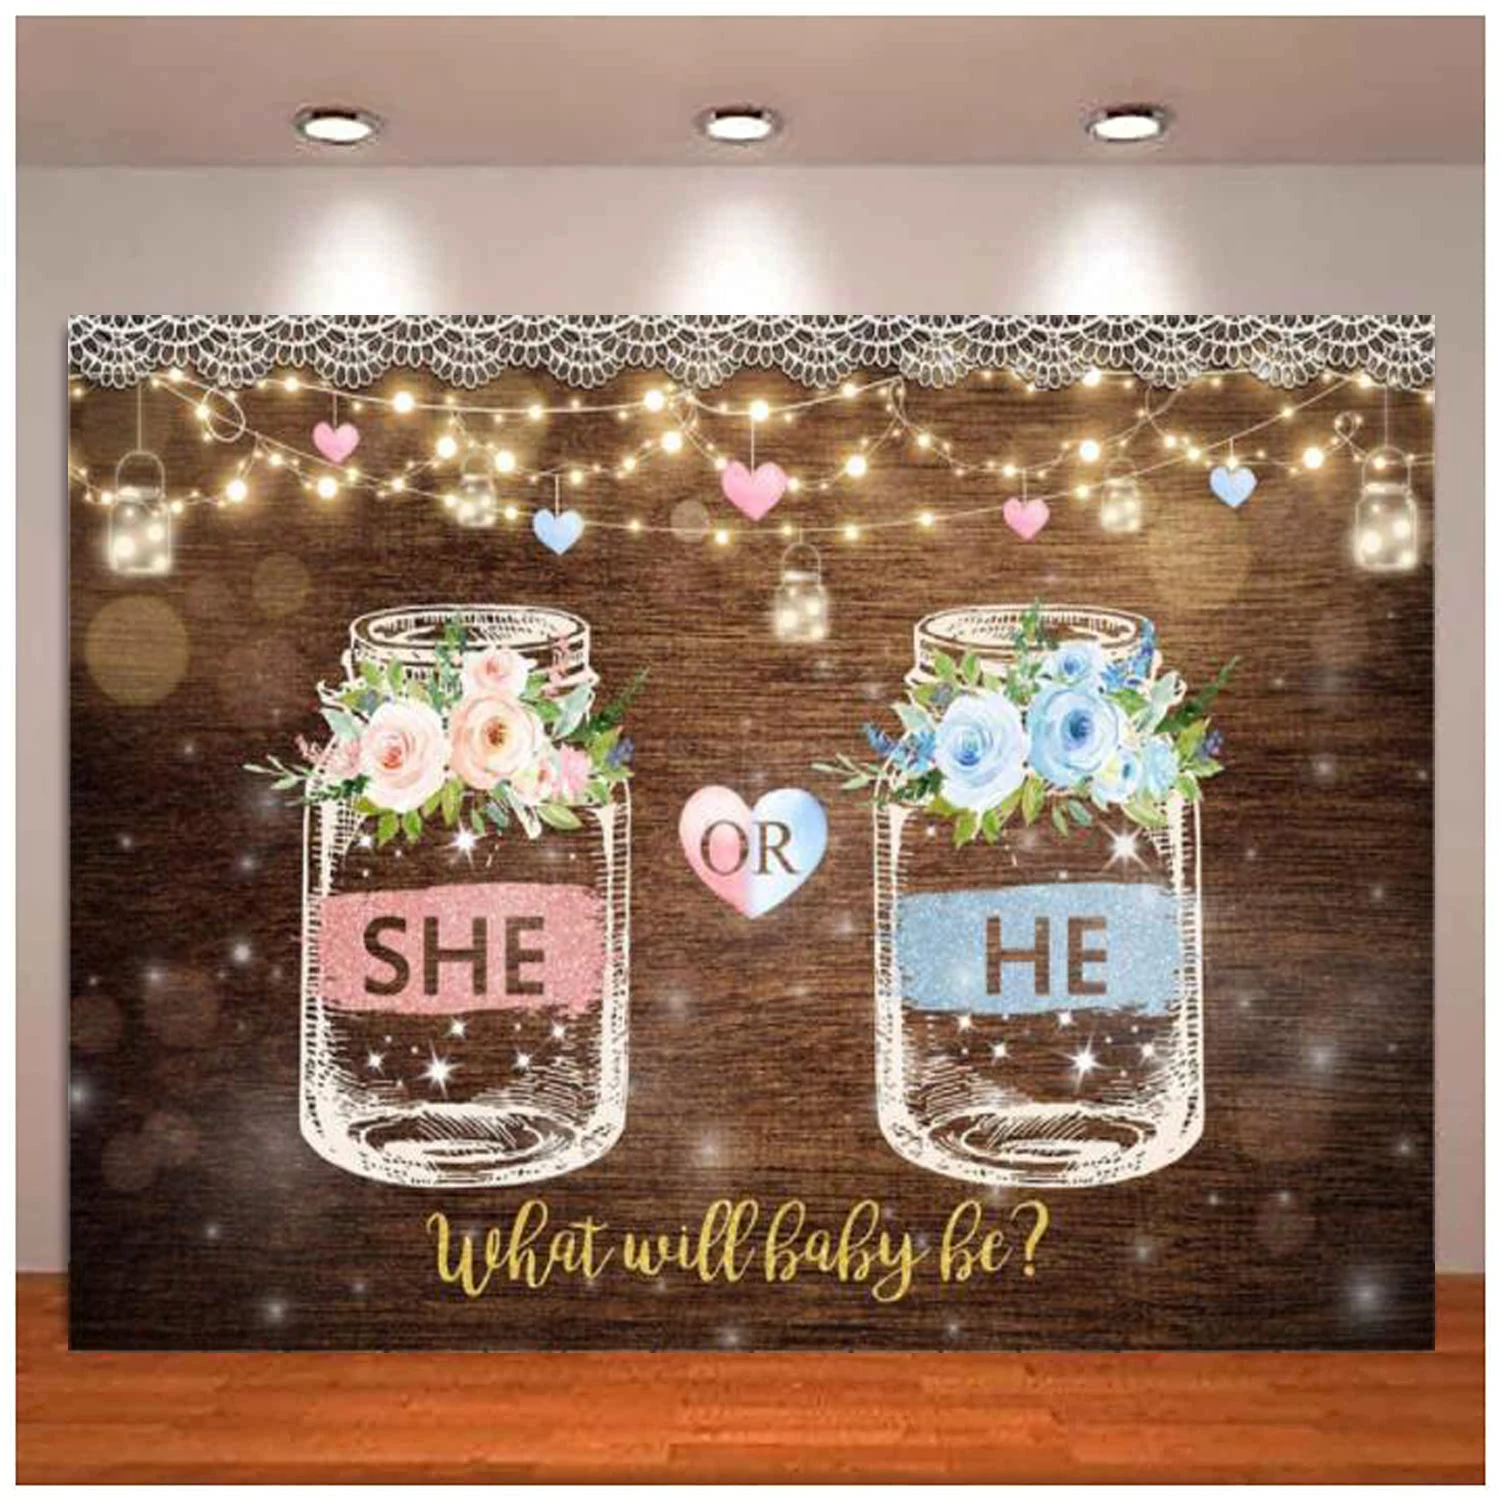 She Or He Gender Reveal Photography Backdrop Brown Wood Wishing Bottle Pink And Blue Flower Background Lace String Lights Decor